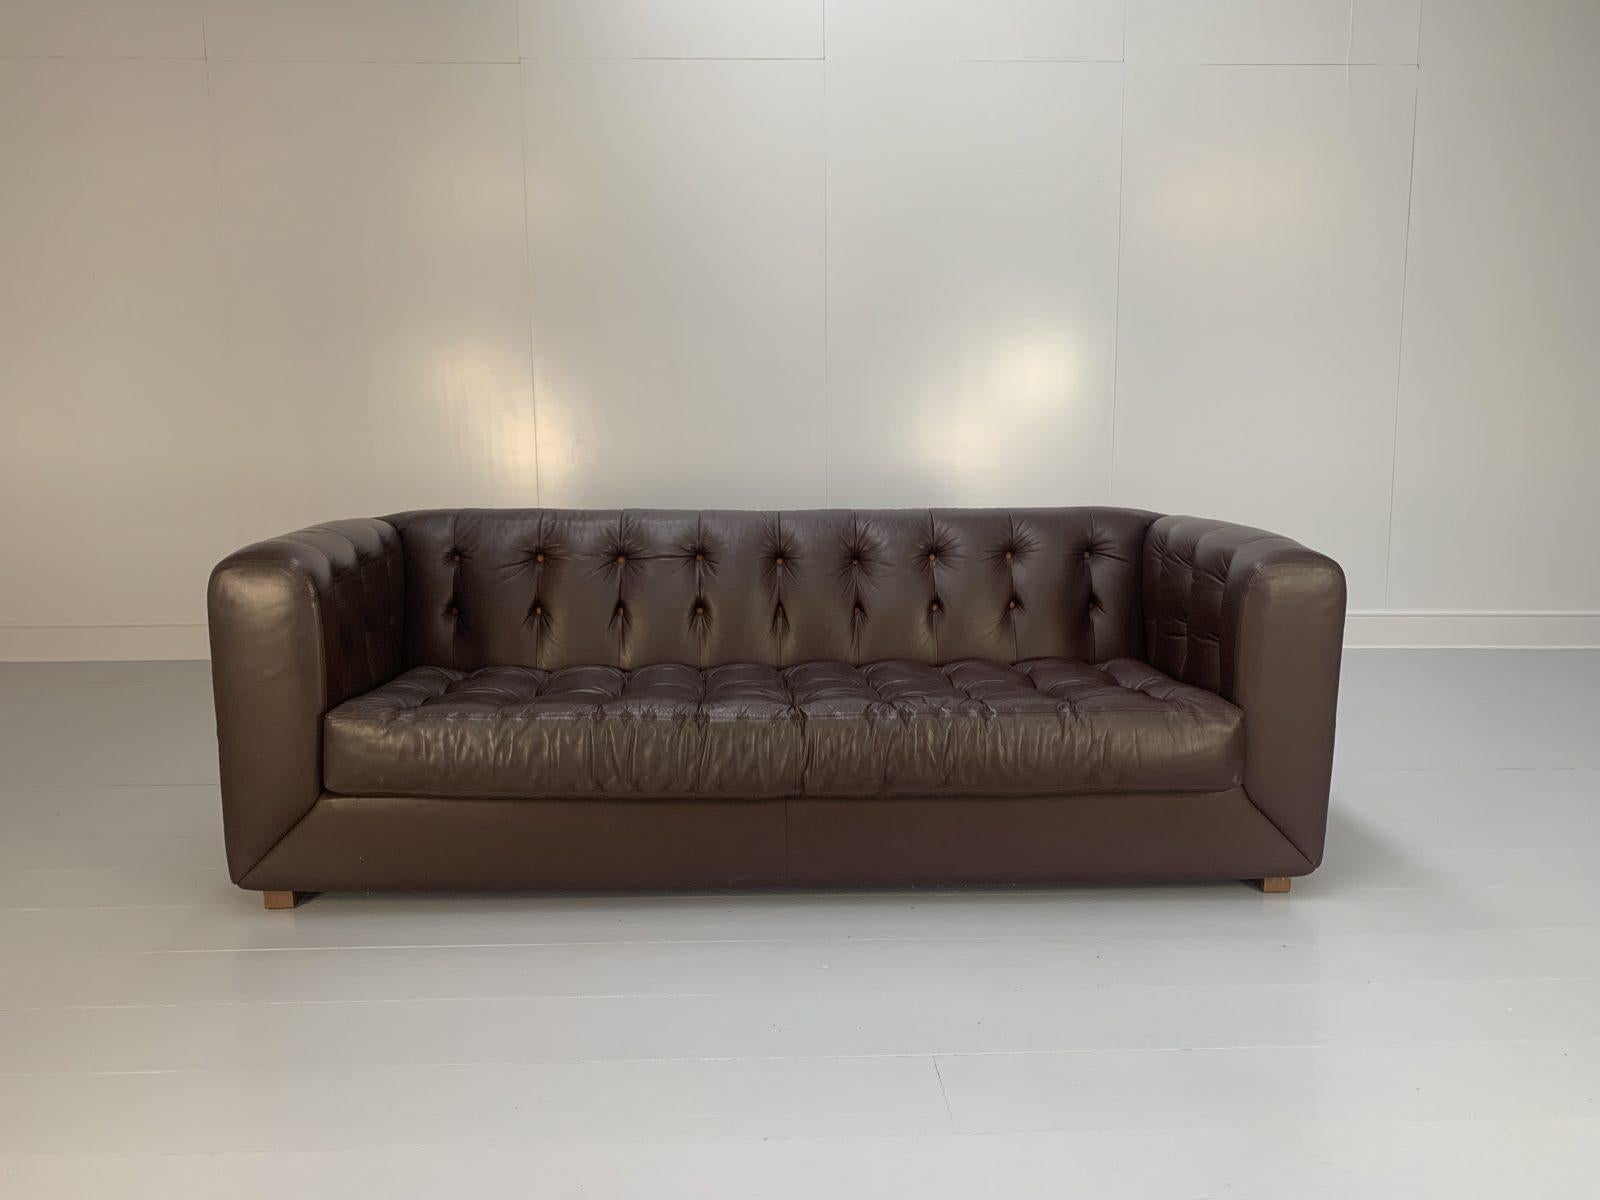 David Linley “Yoxford” Chesterfield 3-Seat Sofa in Brown Leather For Sale